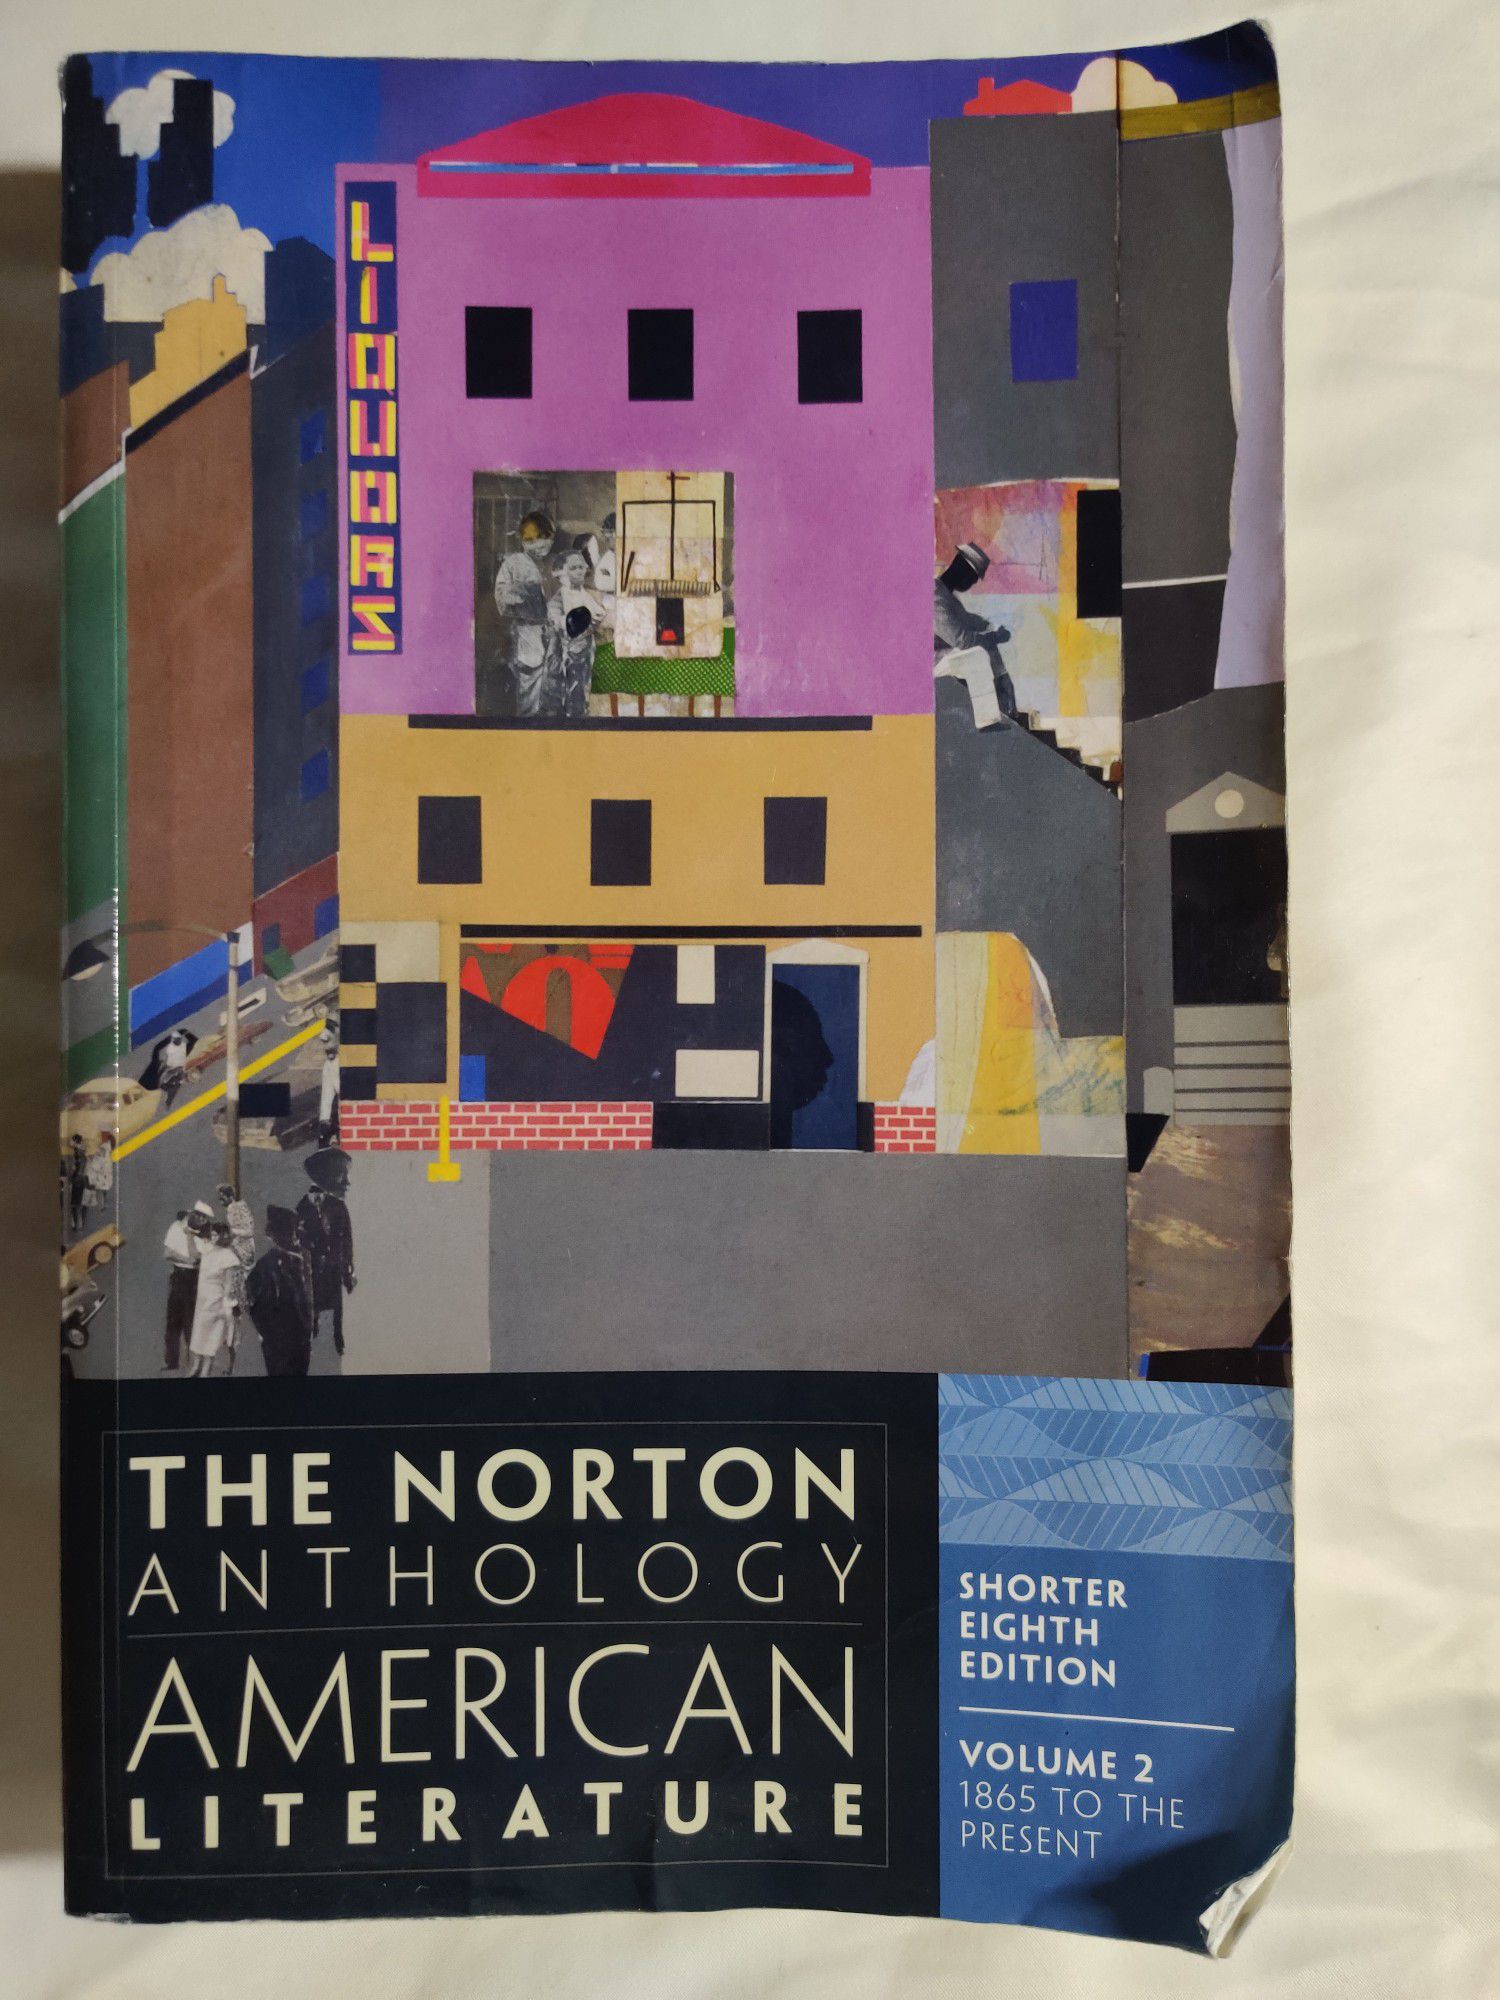 The Norton Anthology of American Literature. Shorter 8th Edition. Volume 2. 1865 to the Present